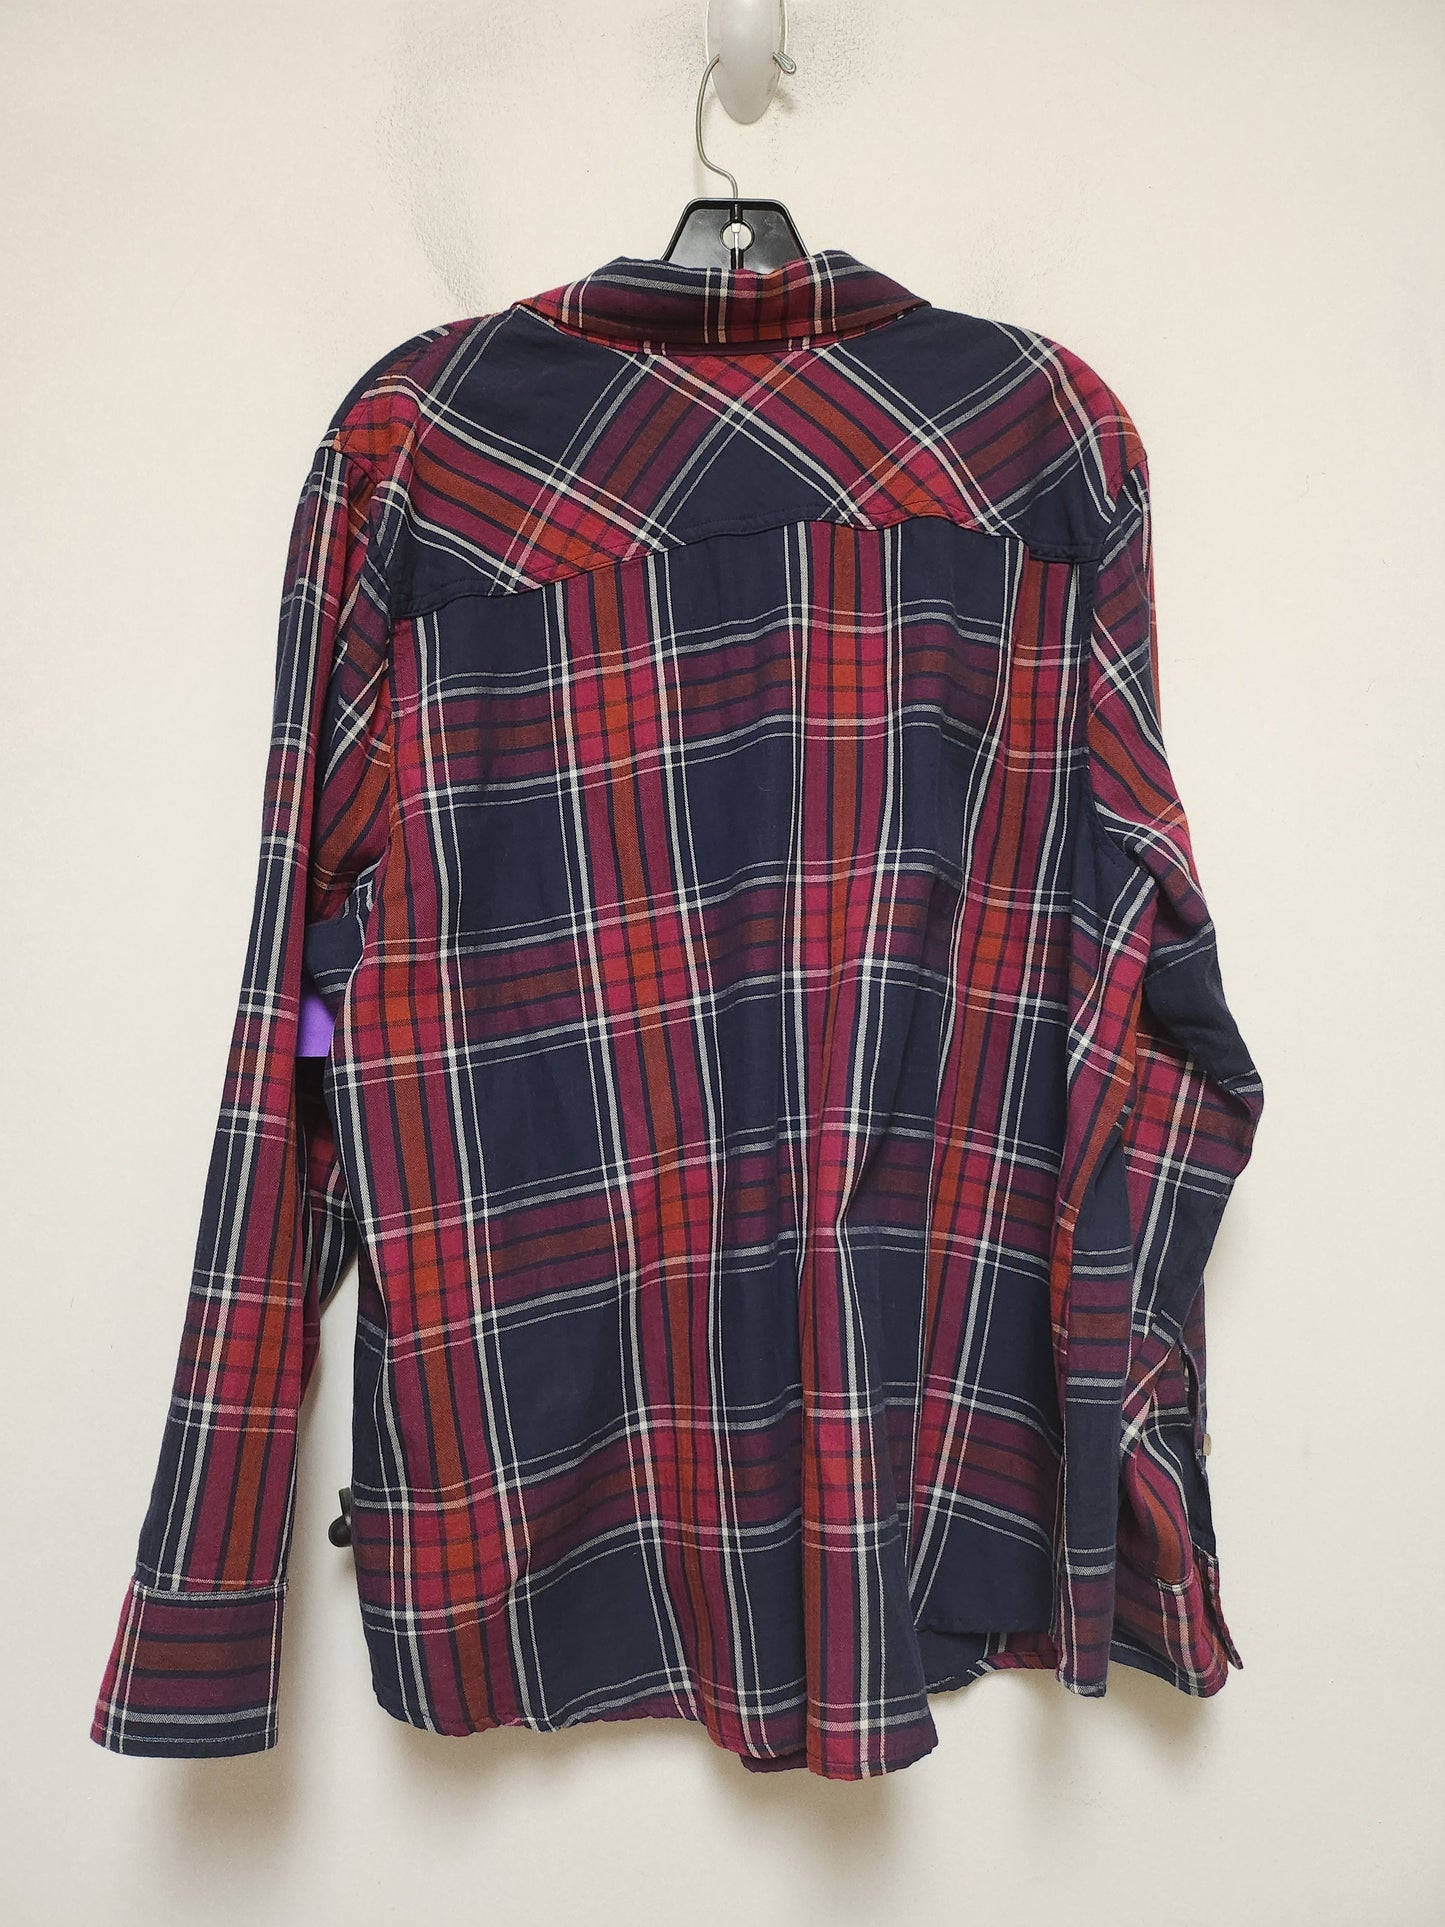 Plaid Pattern Top Long Sleeve Pure Energy, Size 2x